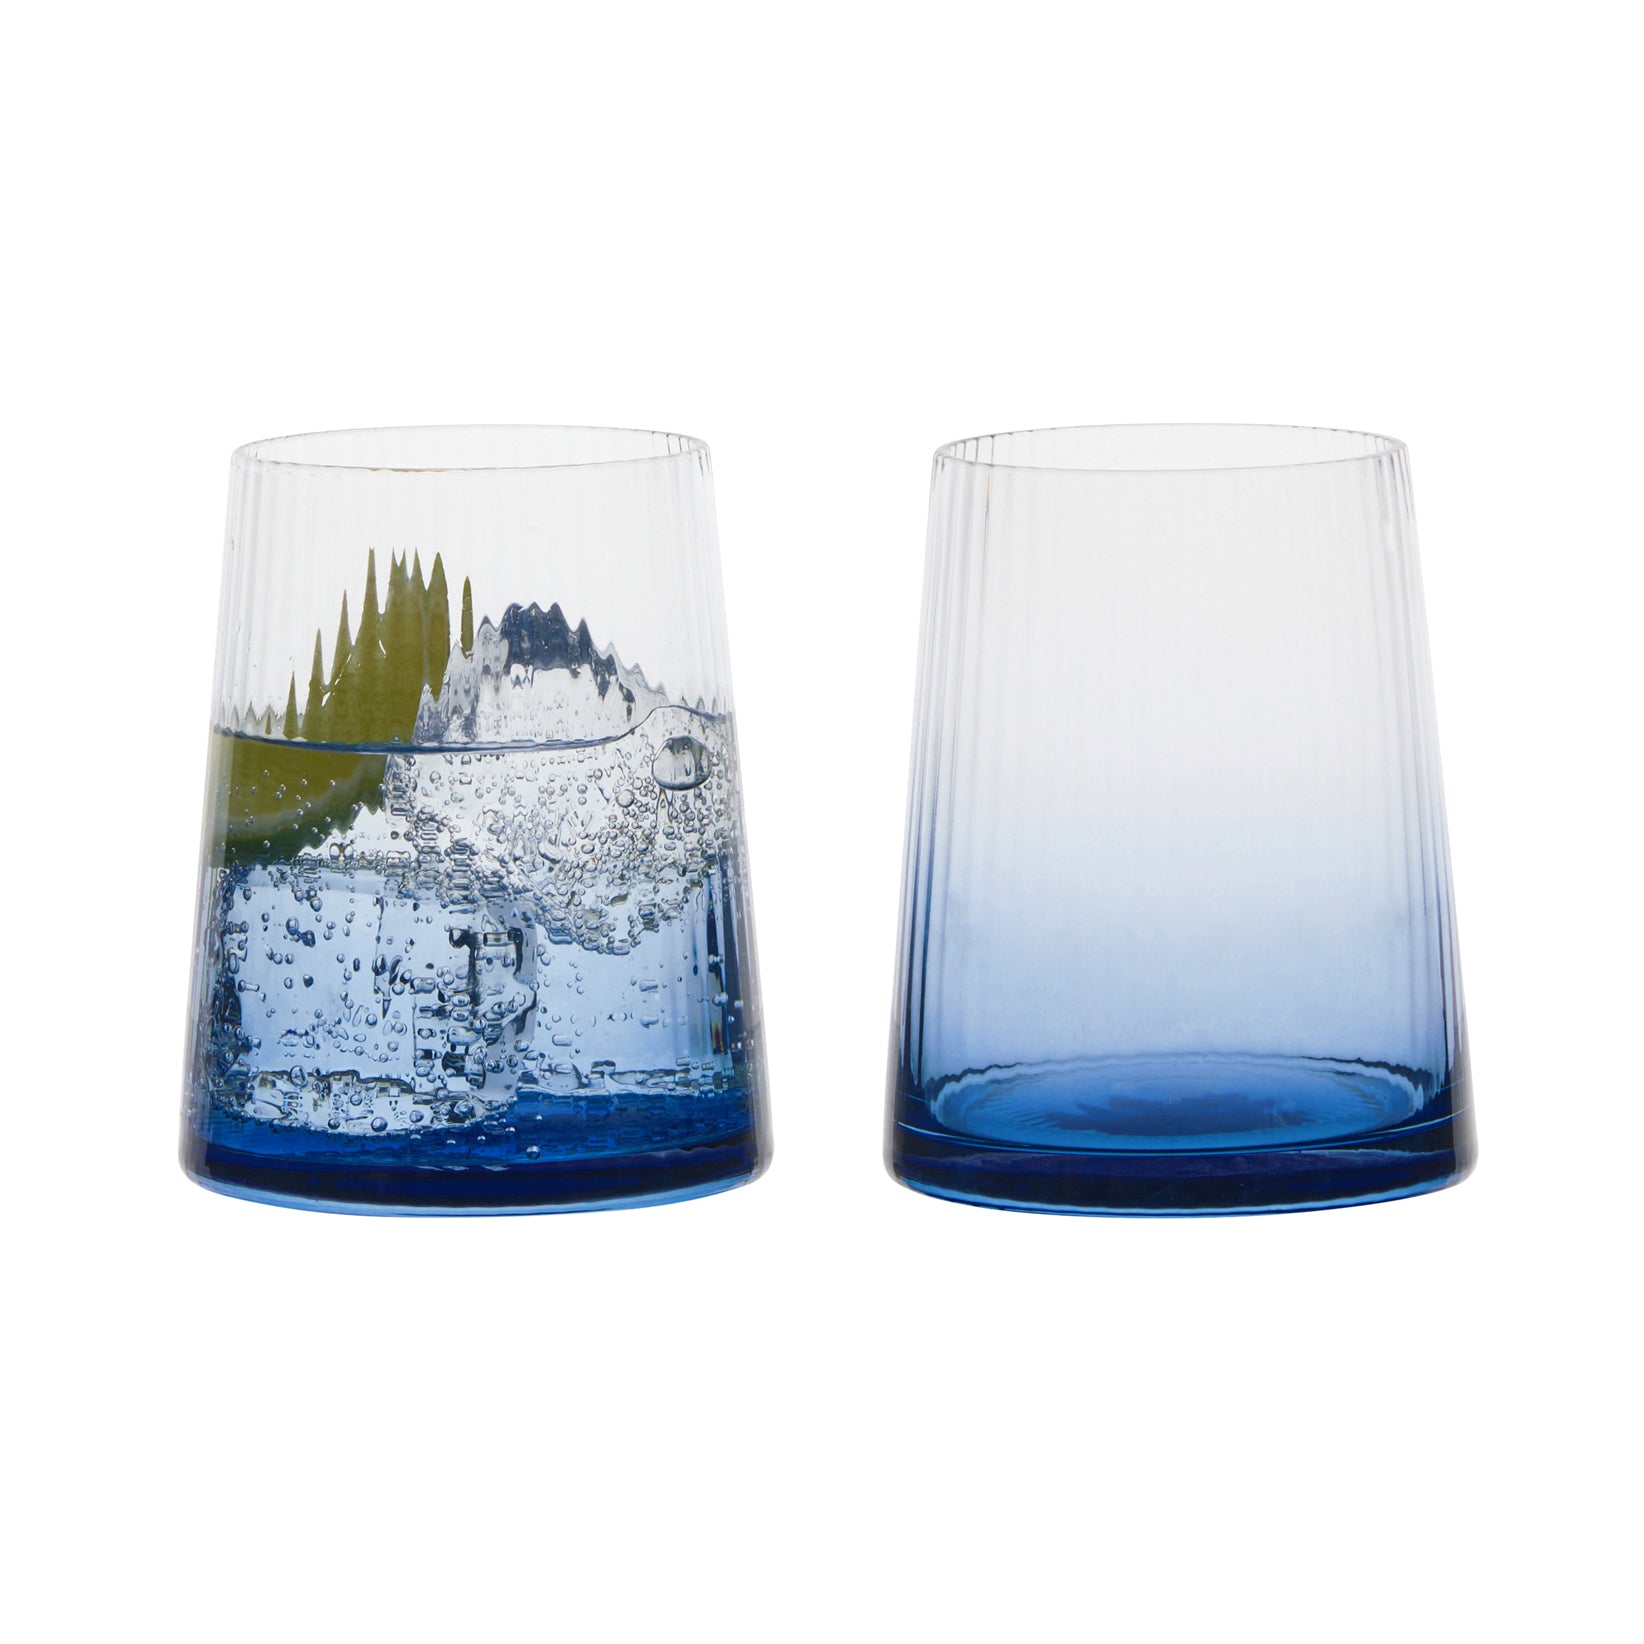 DRH Set of 2 Empire Blue Ribbed Glass Tumbler